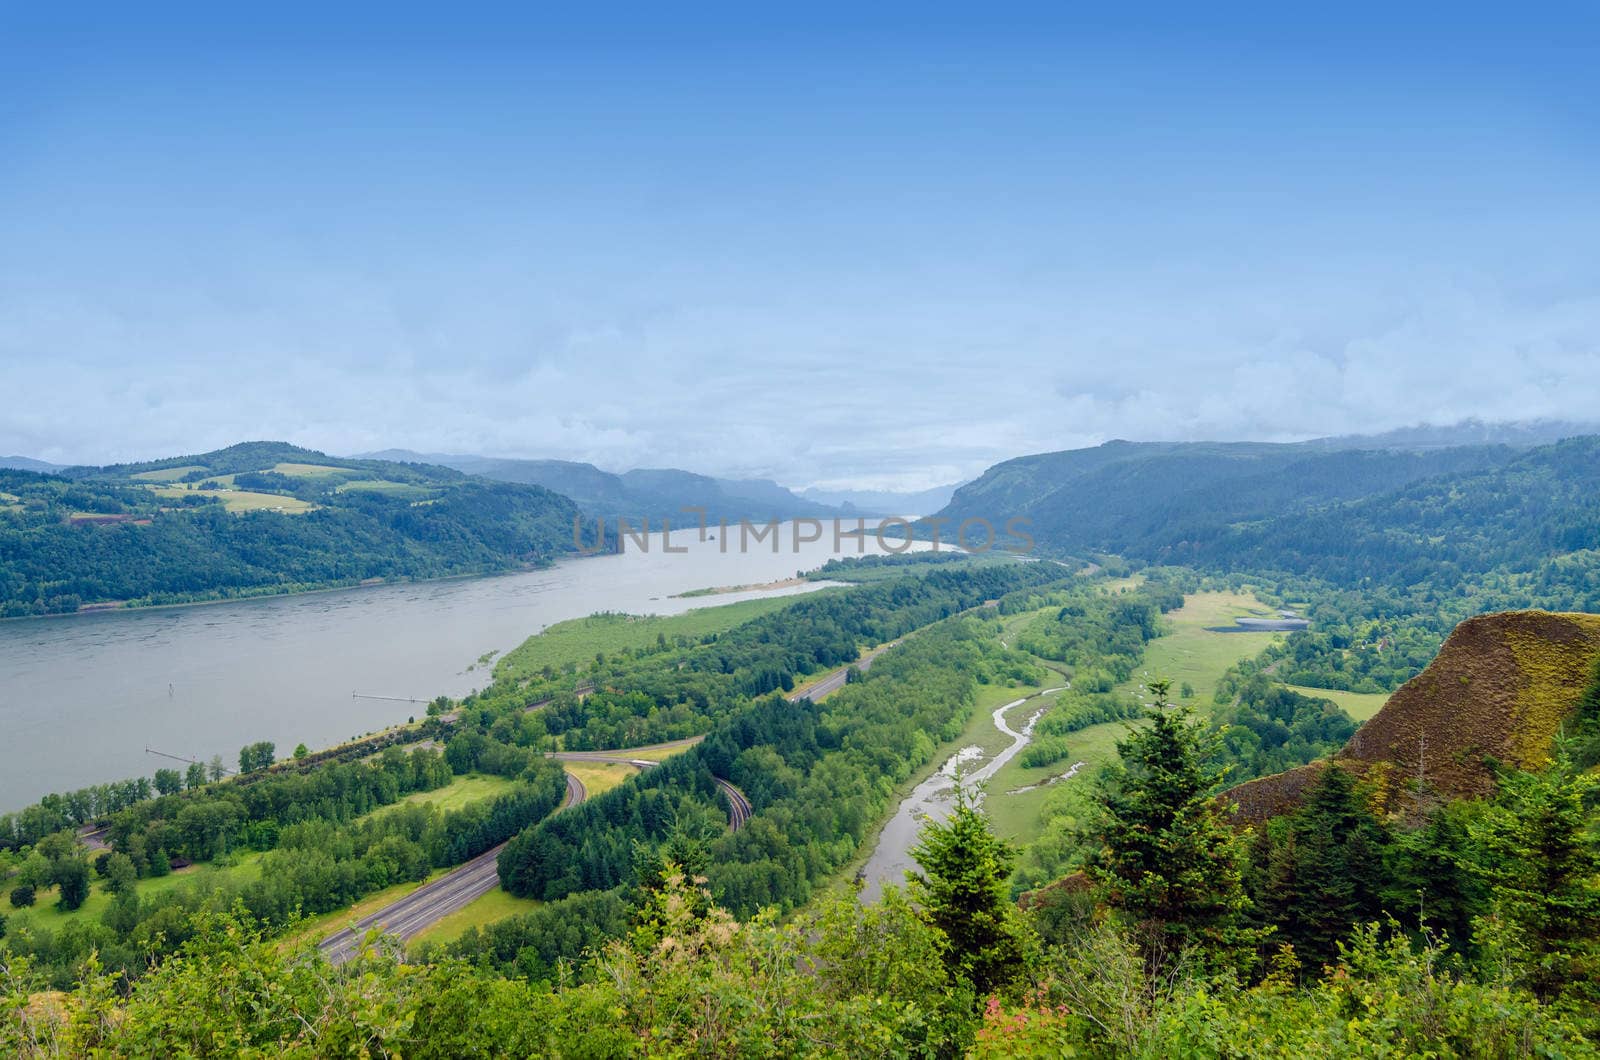 Columbia River Gorge by jkraft5